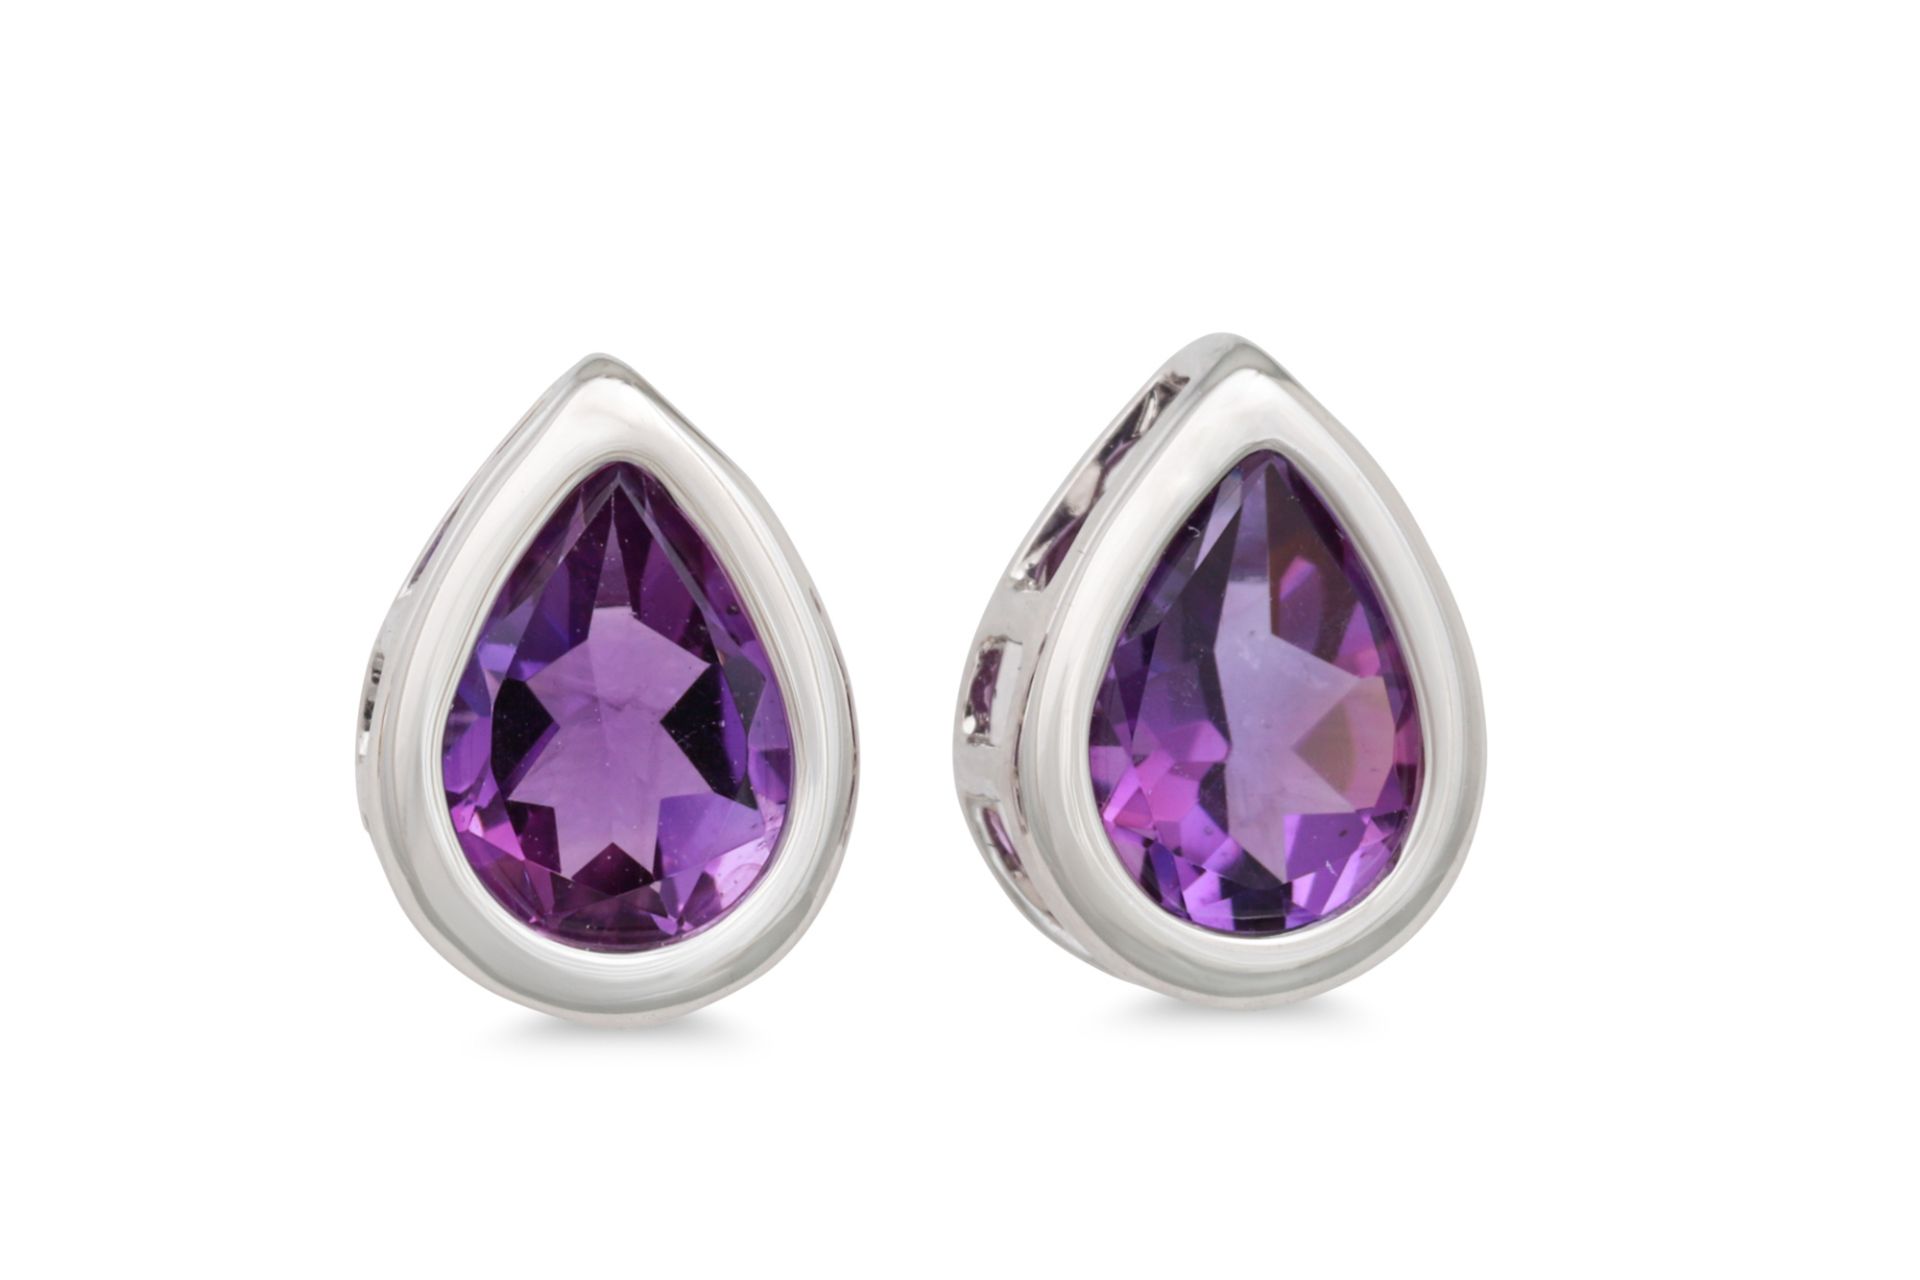 A PAIR OF AMETHYST SET EARRINGS, the pear shaped amethyst mounted in 18ct white gold